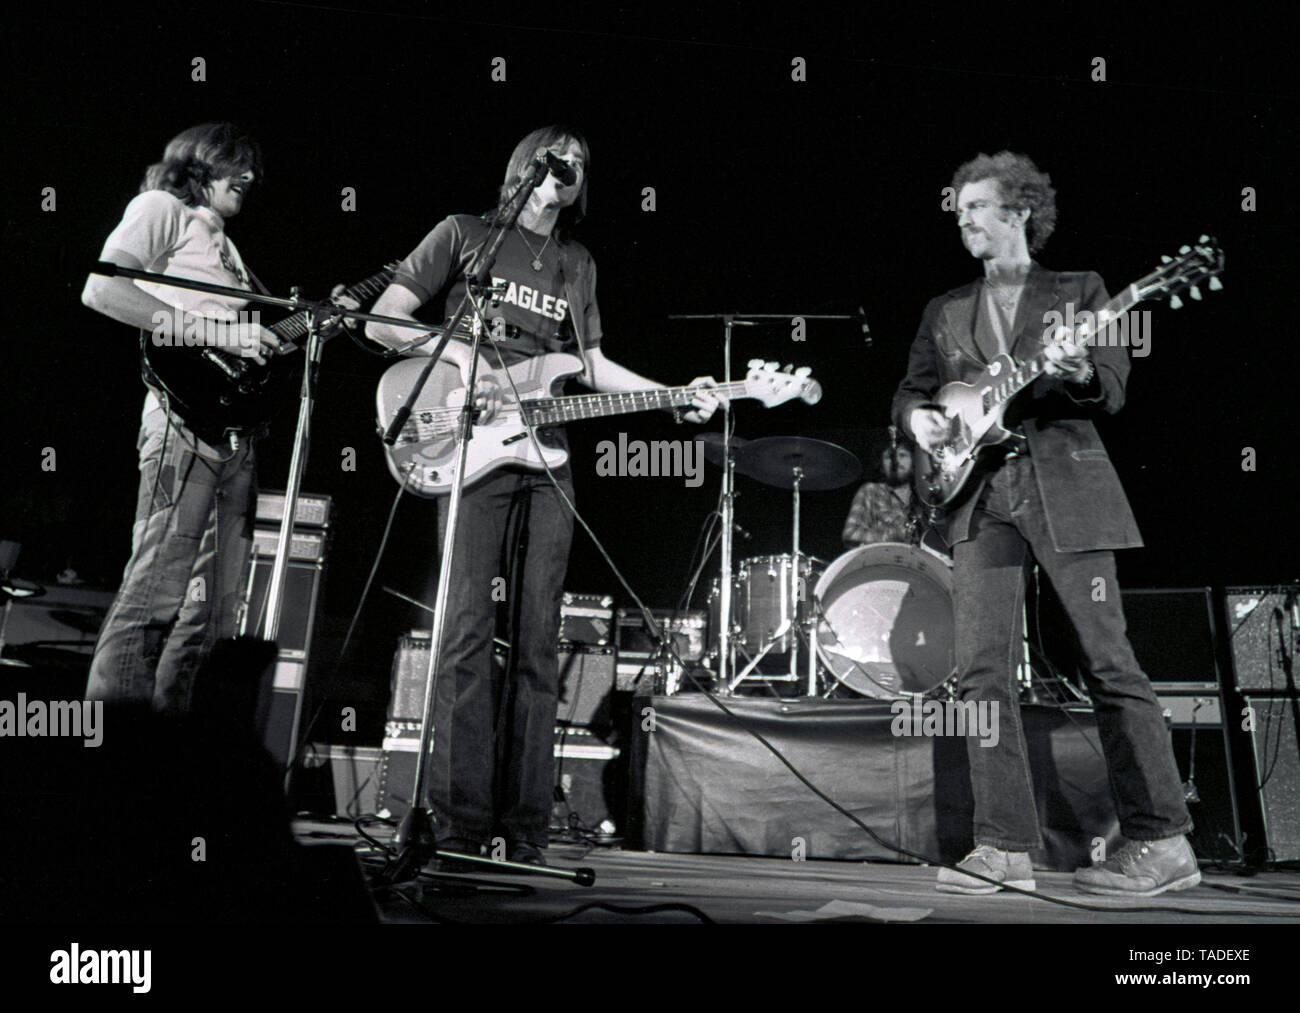 Amsterdam, Netherlands - 1st JANUARY: American group Eagles perform live on stage at Concertgebouw in Amsterdam, Netherlands in 1972. Left to right:Glenn Frey ,  Randy Meisner and Bernie Leadon. (Photo Gijsbert Hanekroot) Stock Photo